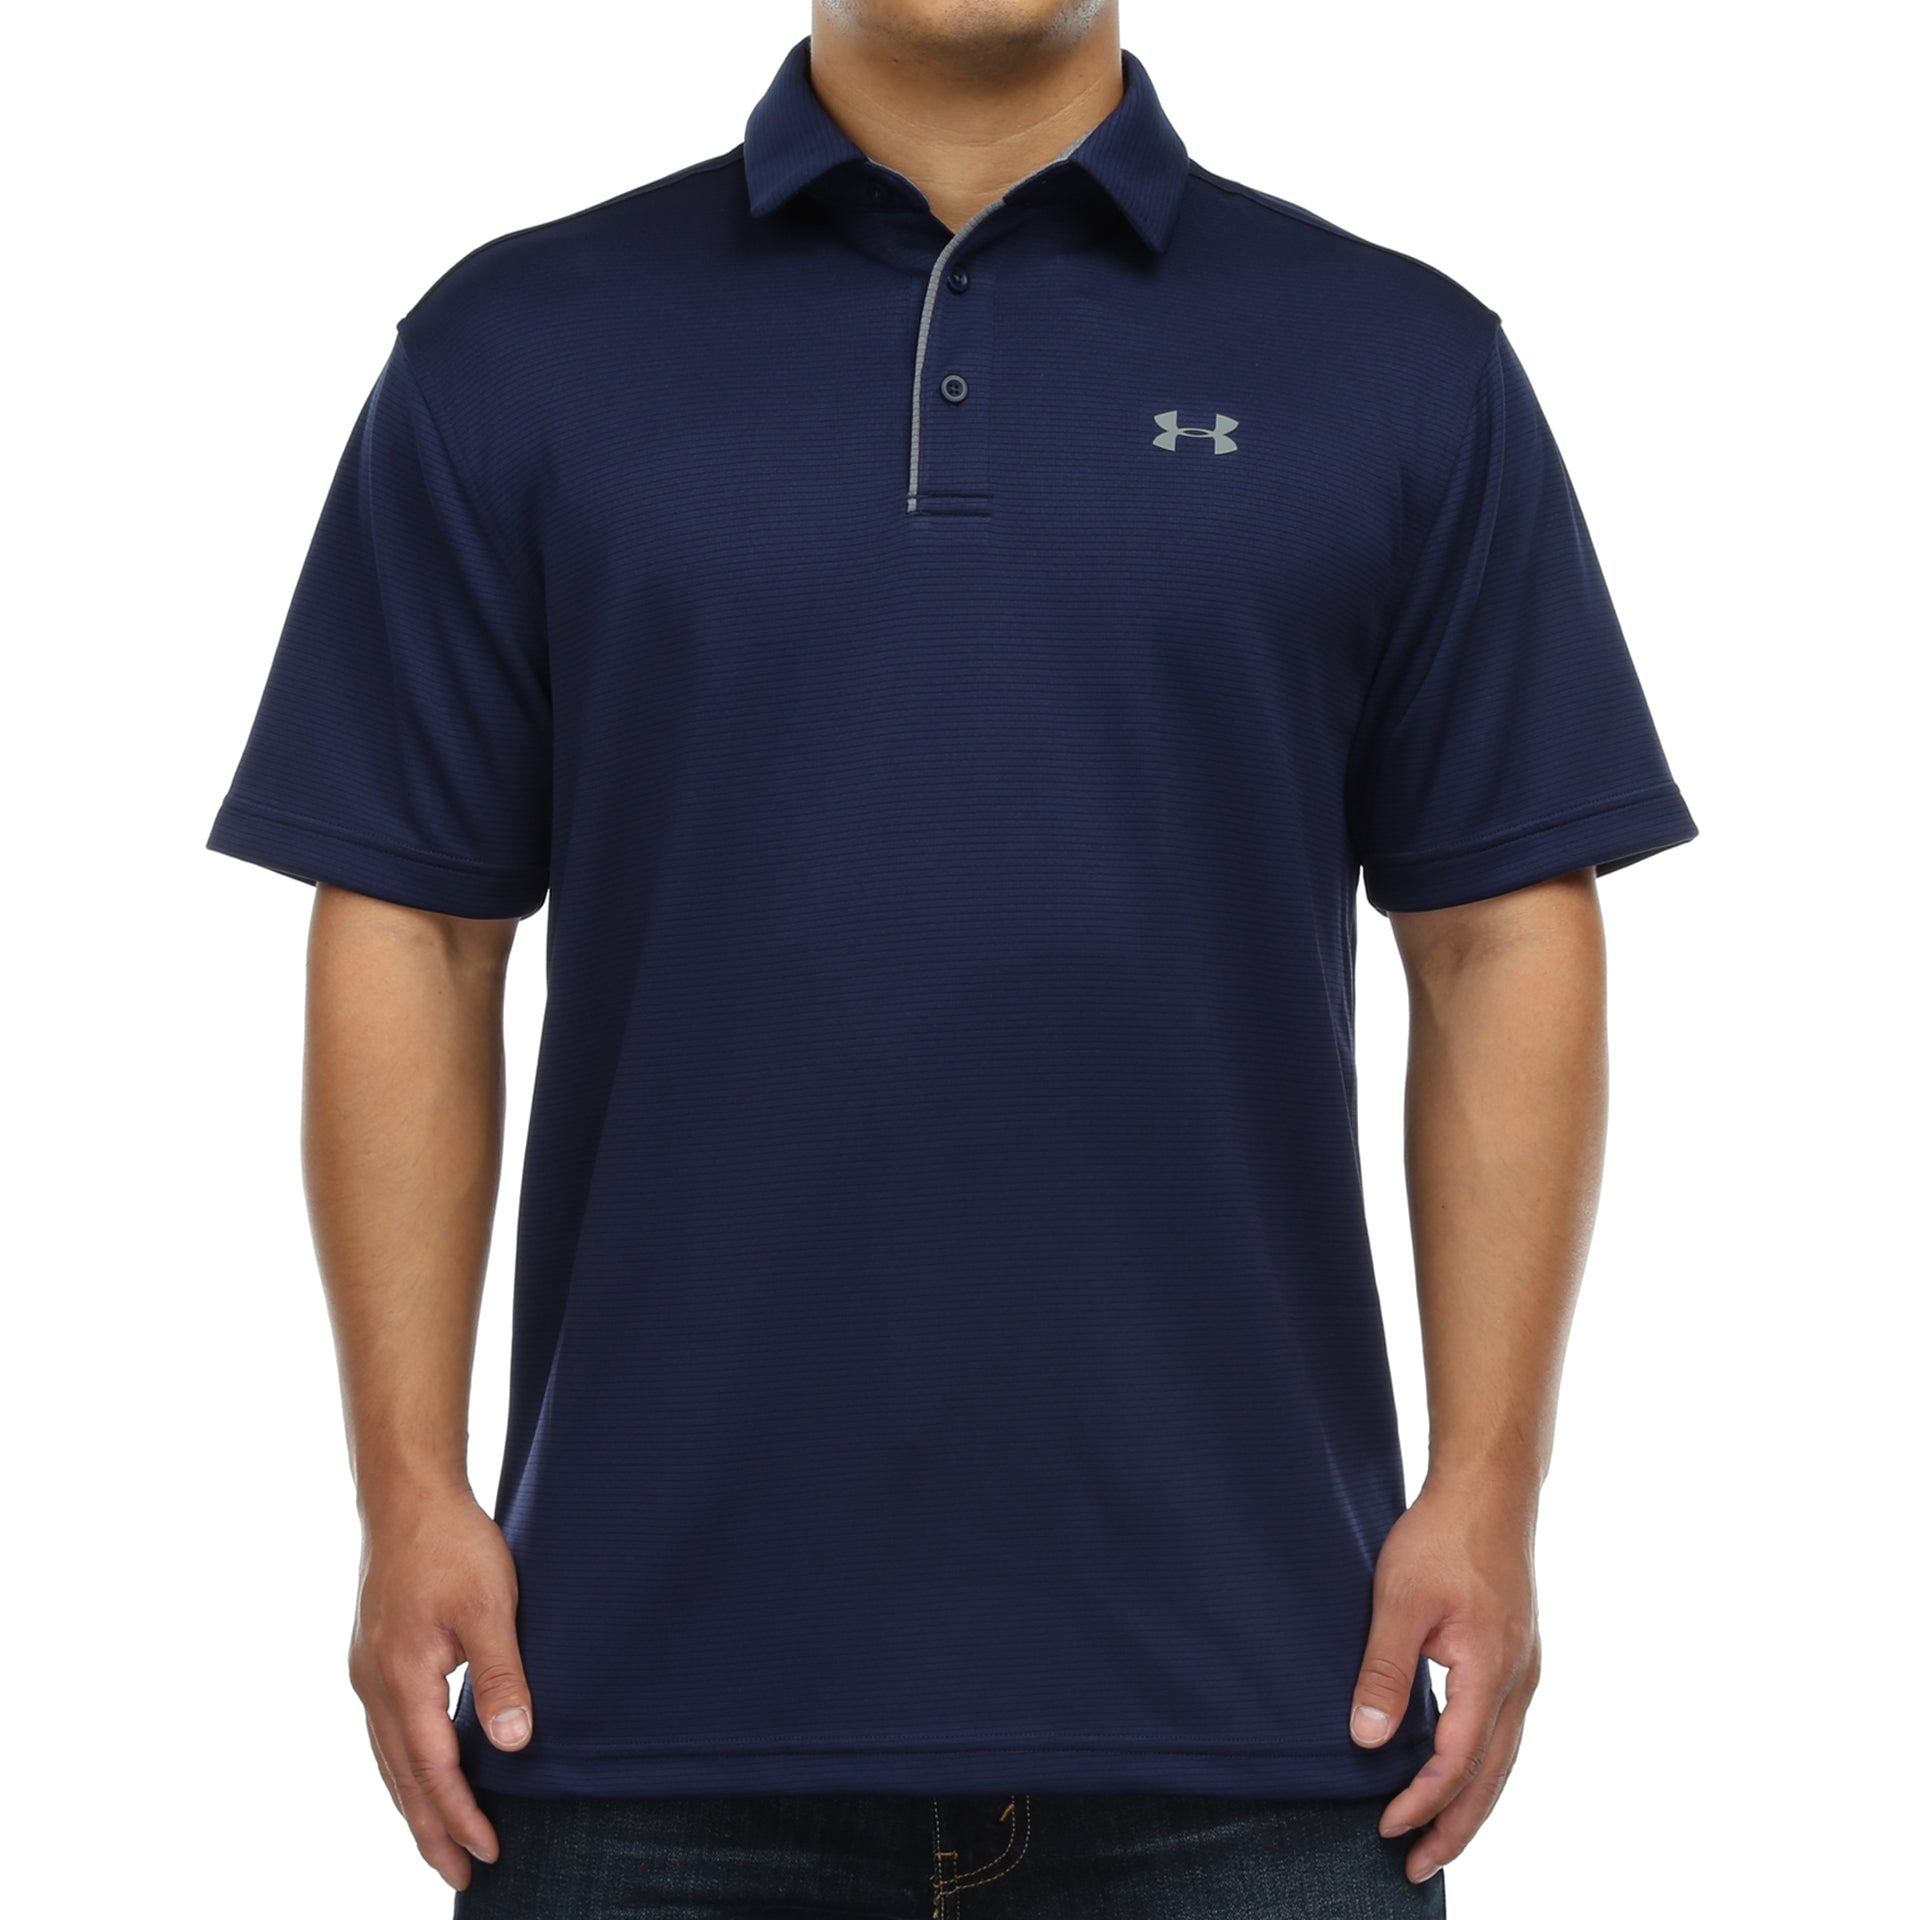 Implementar Requisitos cubierta Under Armour Tech Polo - Midnight Navy - New Star